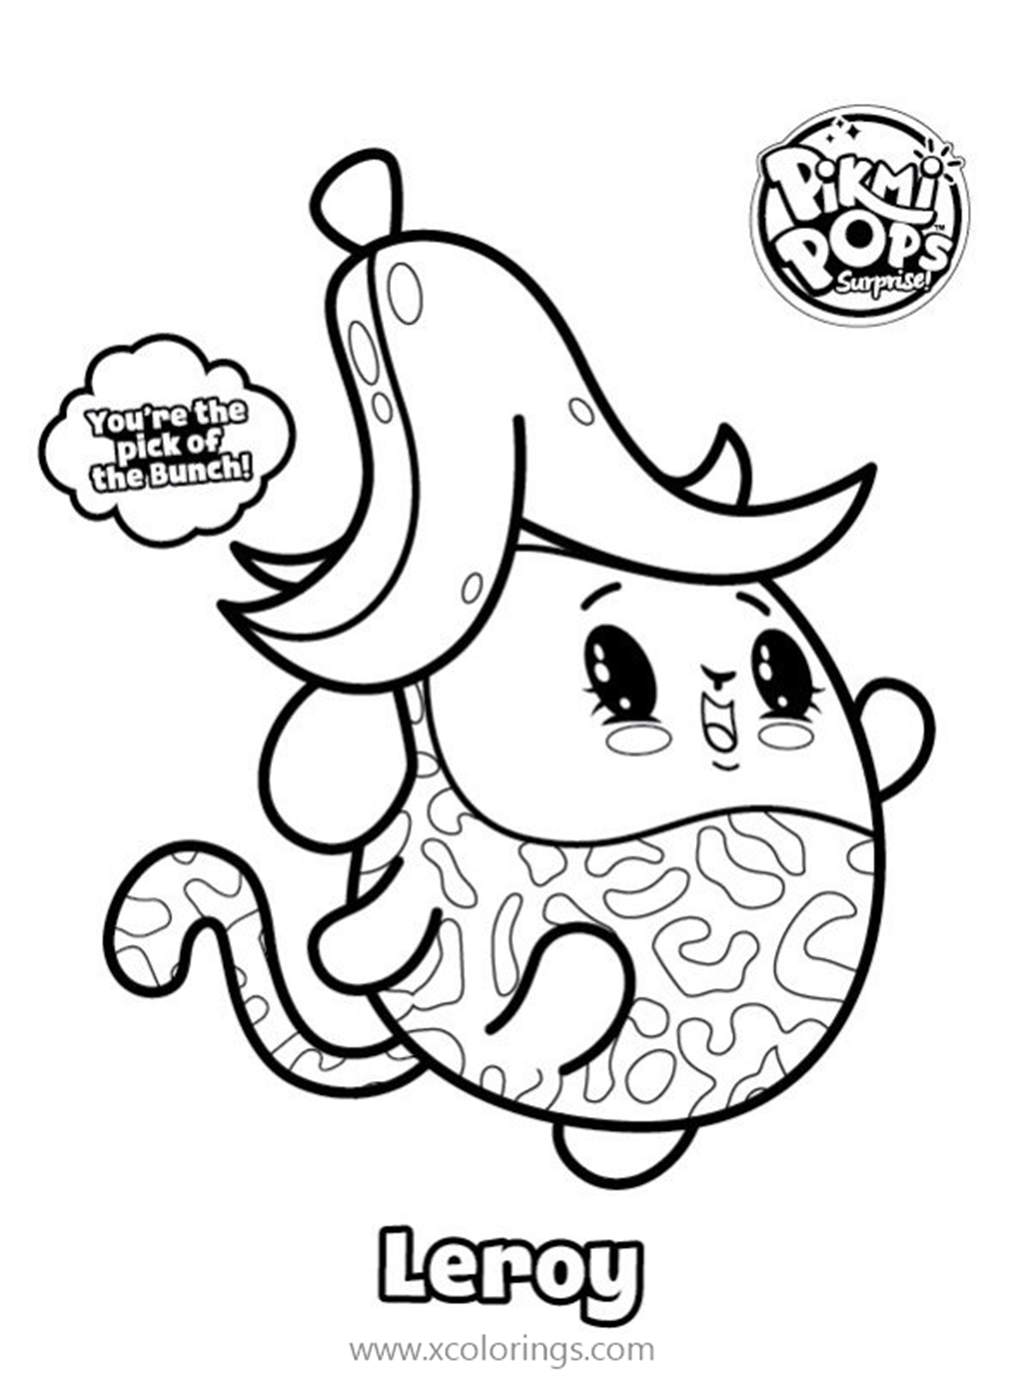 Free Pikmi Pops Coloring Pages Leroy printable